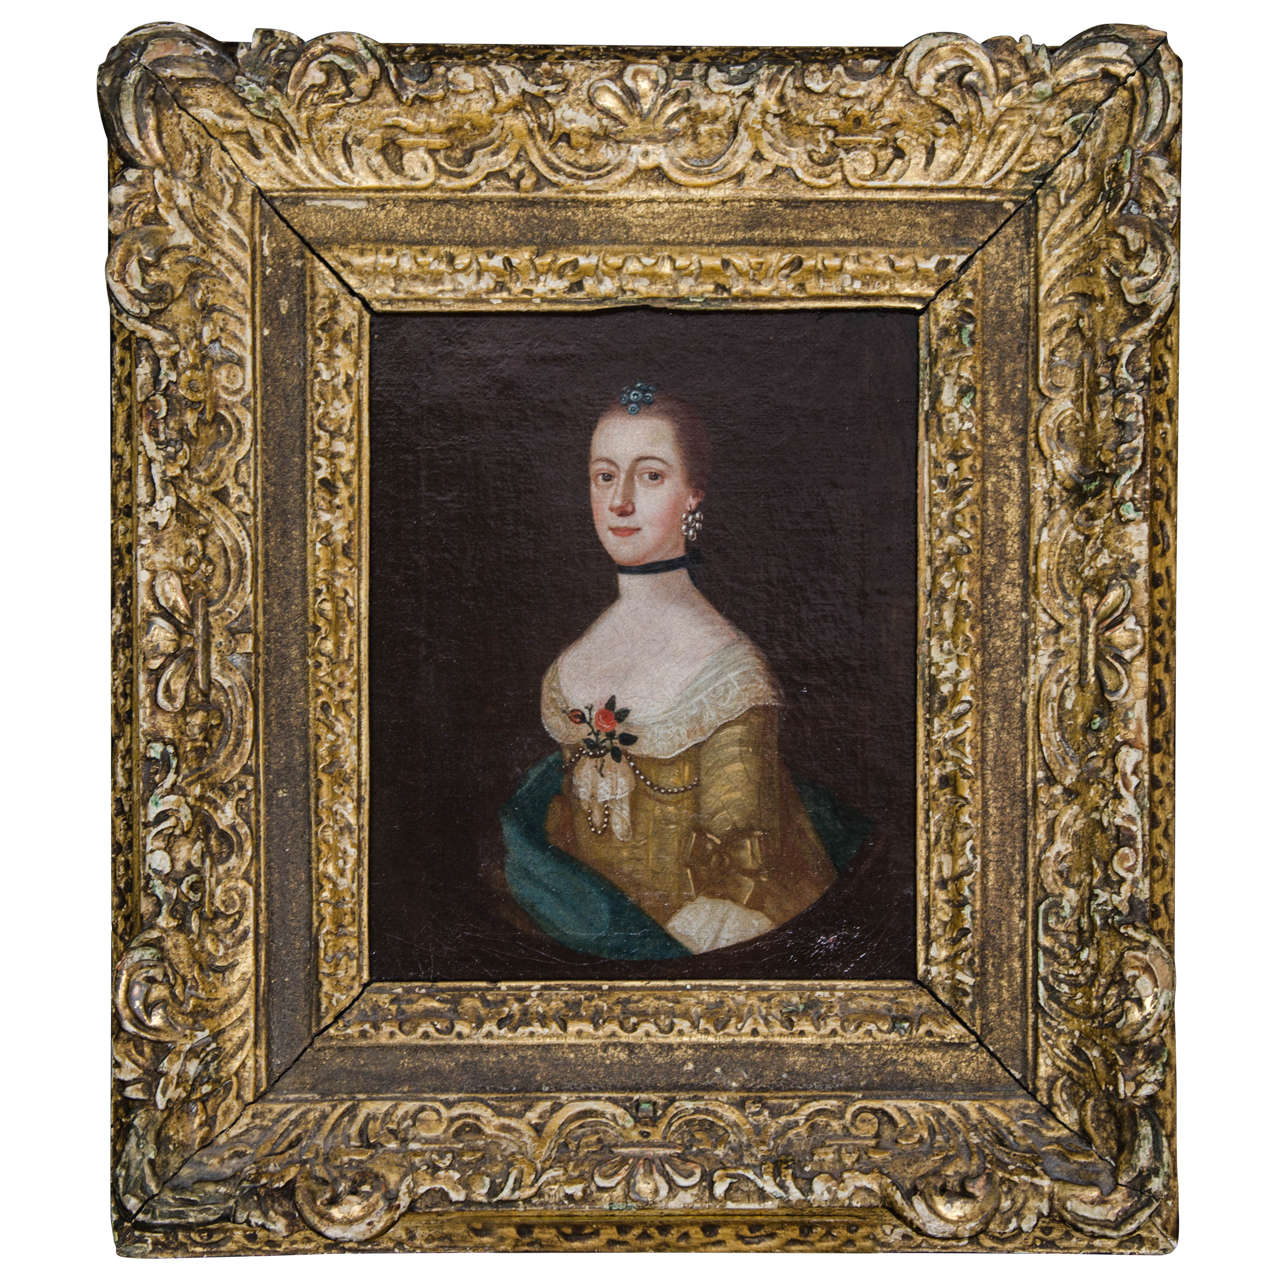 Georgian Small Portrait of a Young Lady, circa 1730